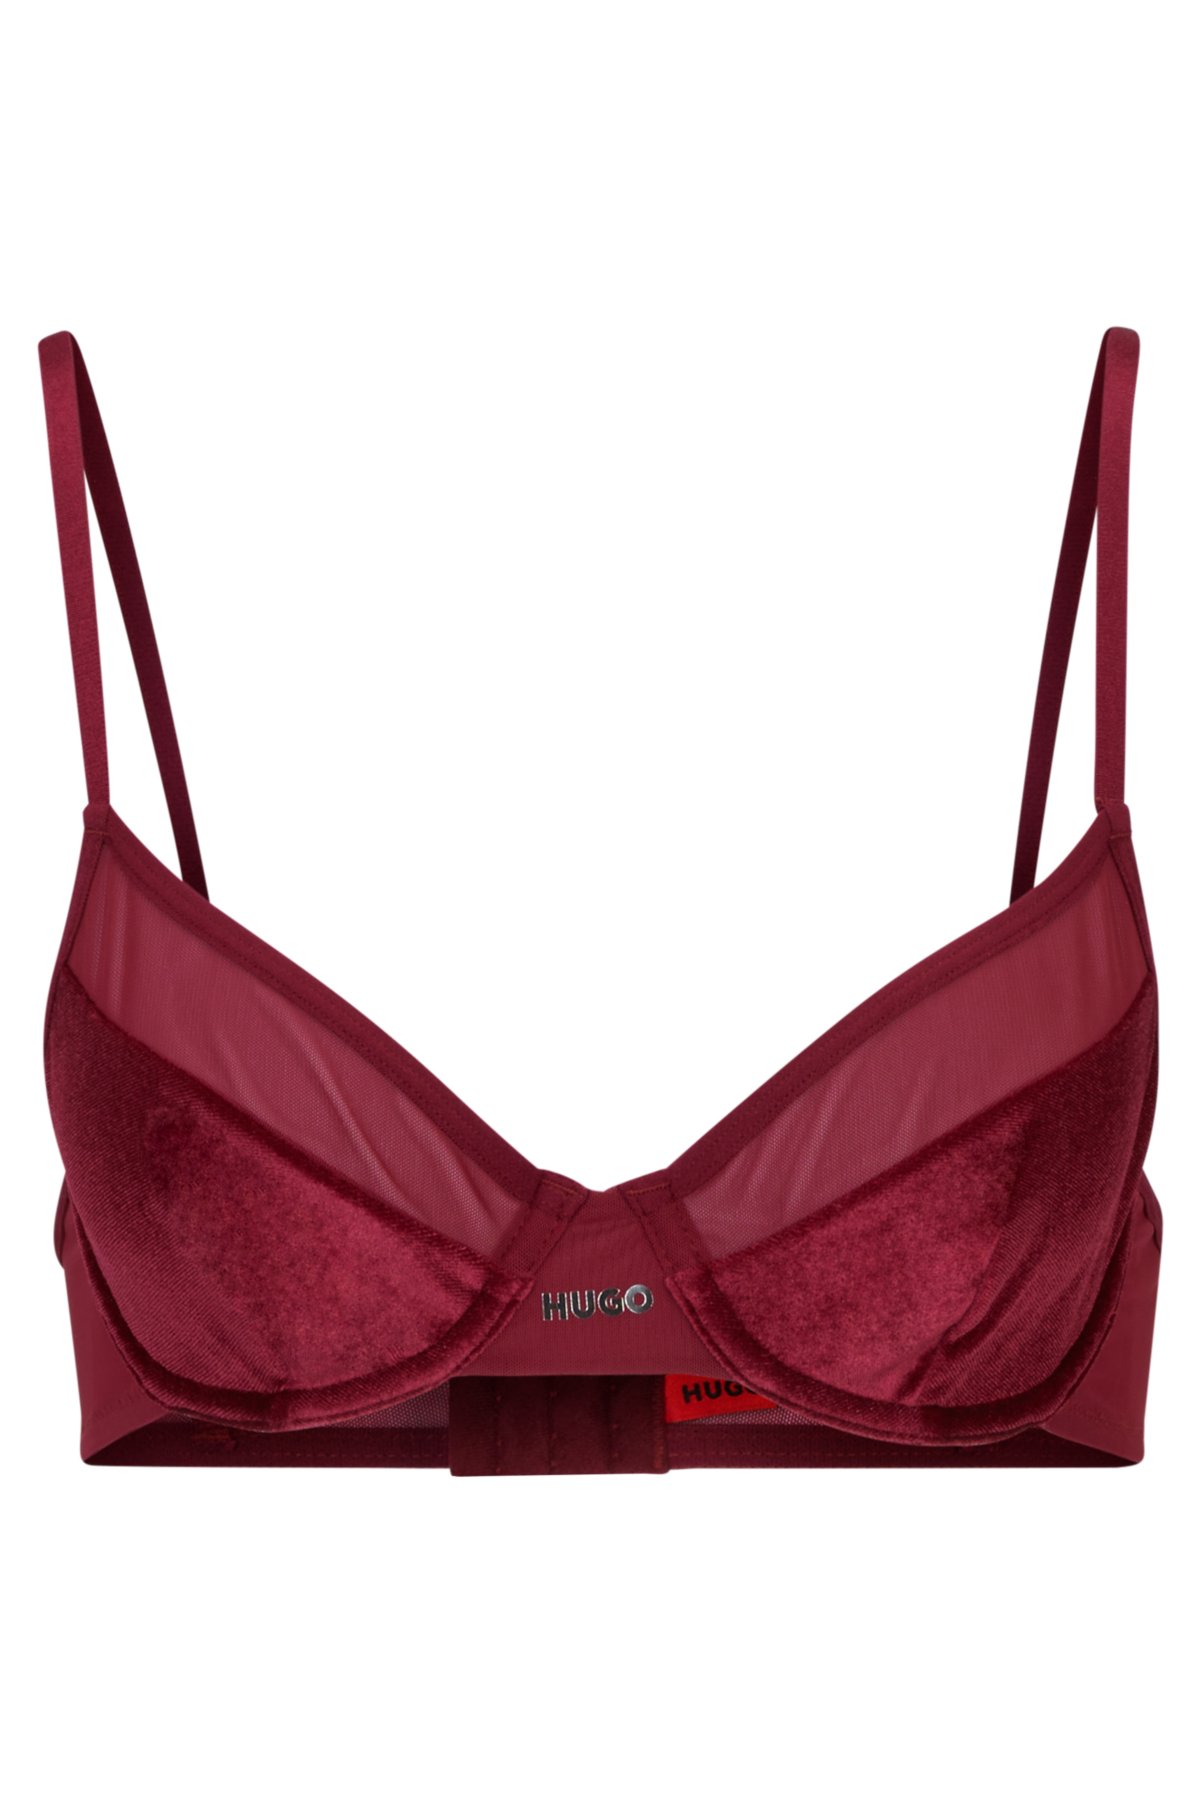 M&S limited collection non padded push-up bra Available in size